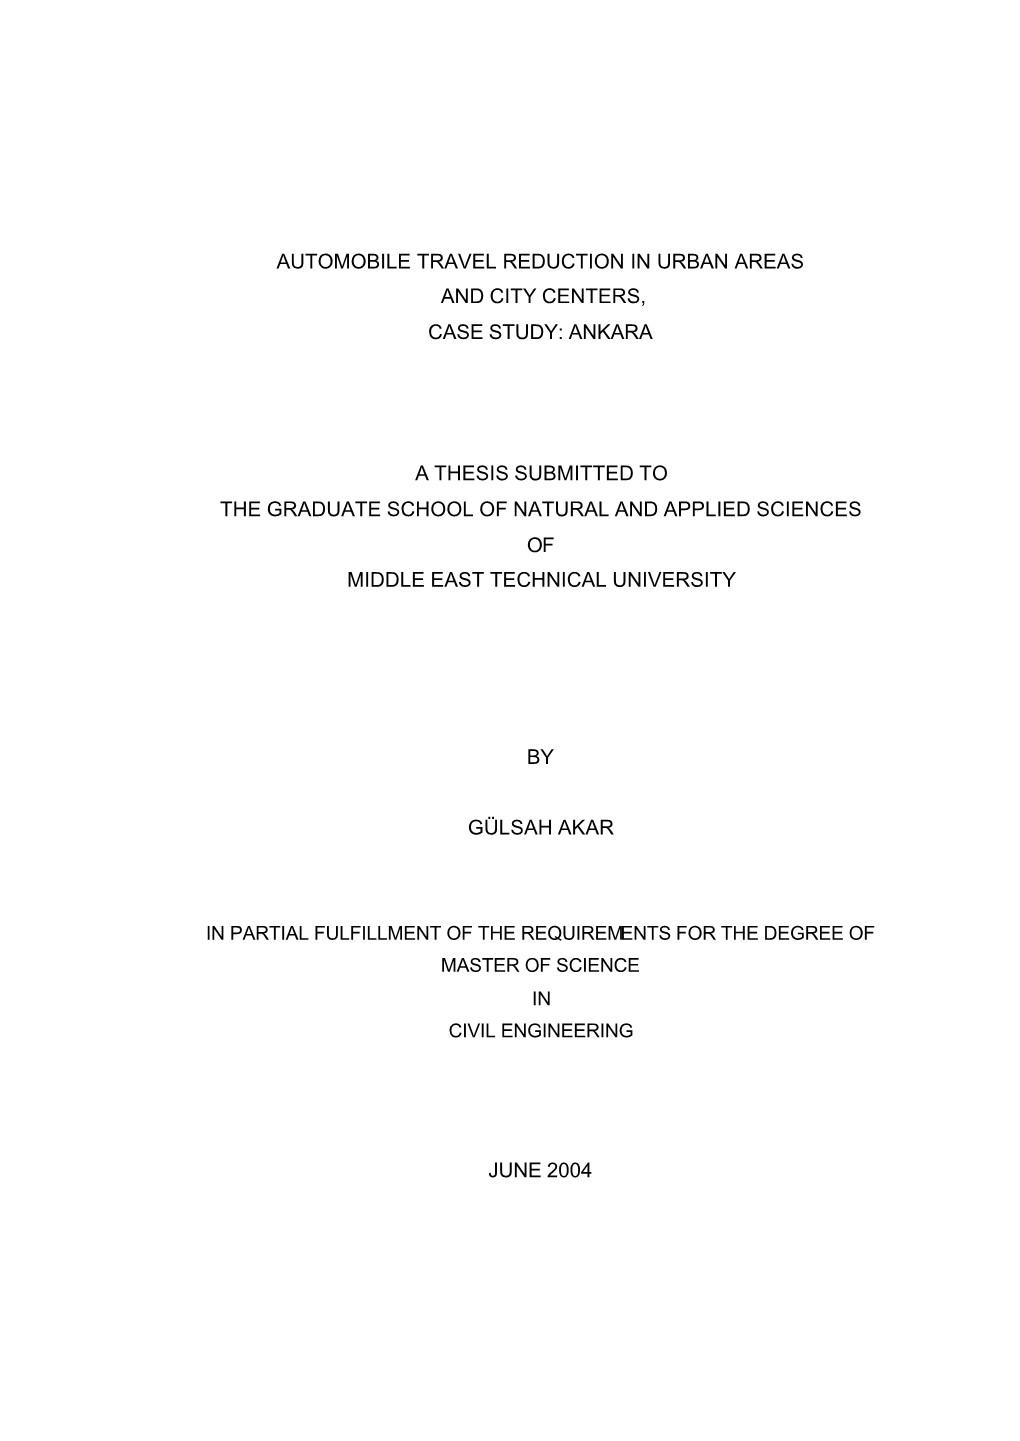 Automobile Travel Reduction in Urban Areas and City Centers, Case Study: Ankara a Thesis Submitted to the Graduate School of Na